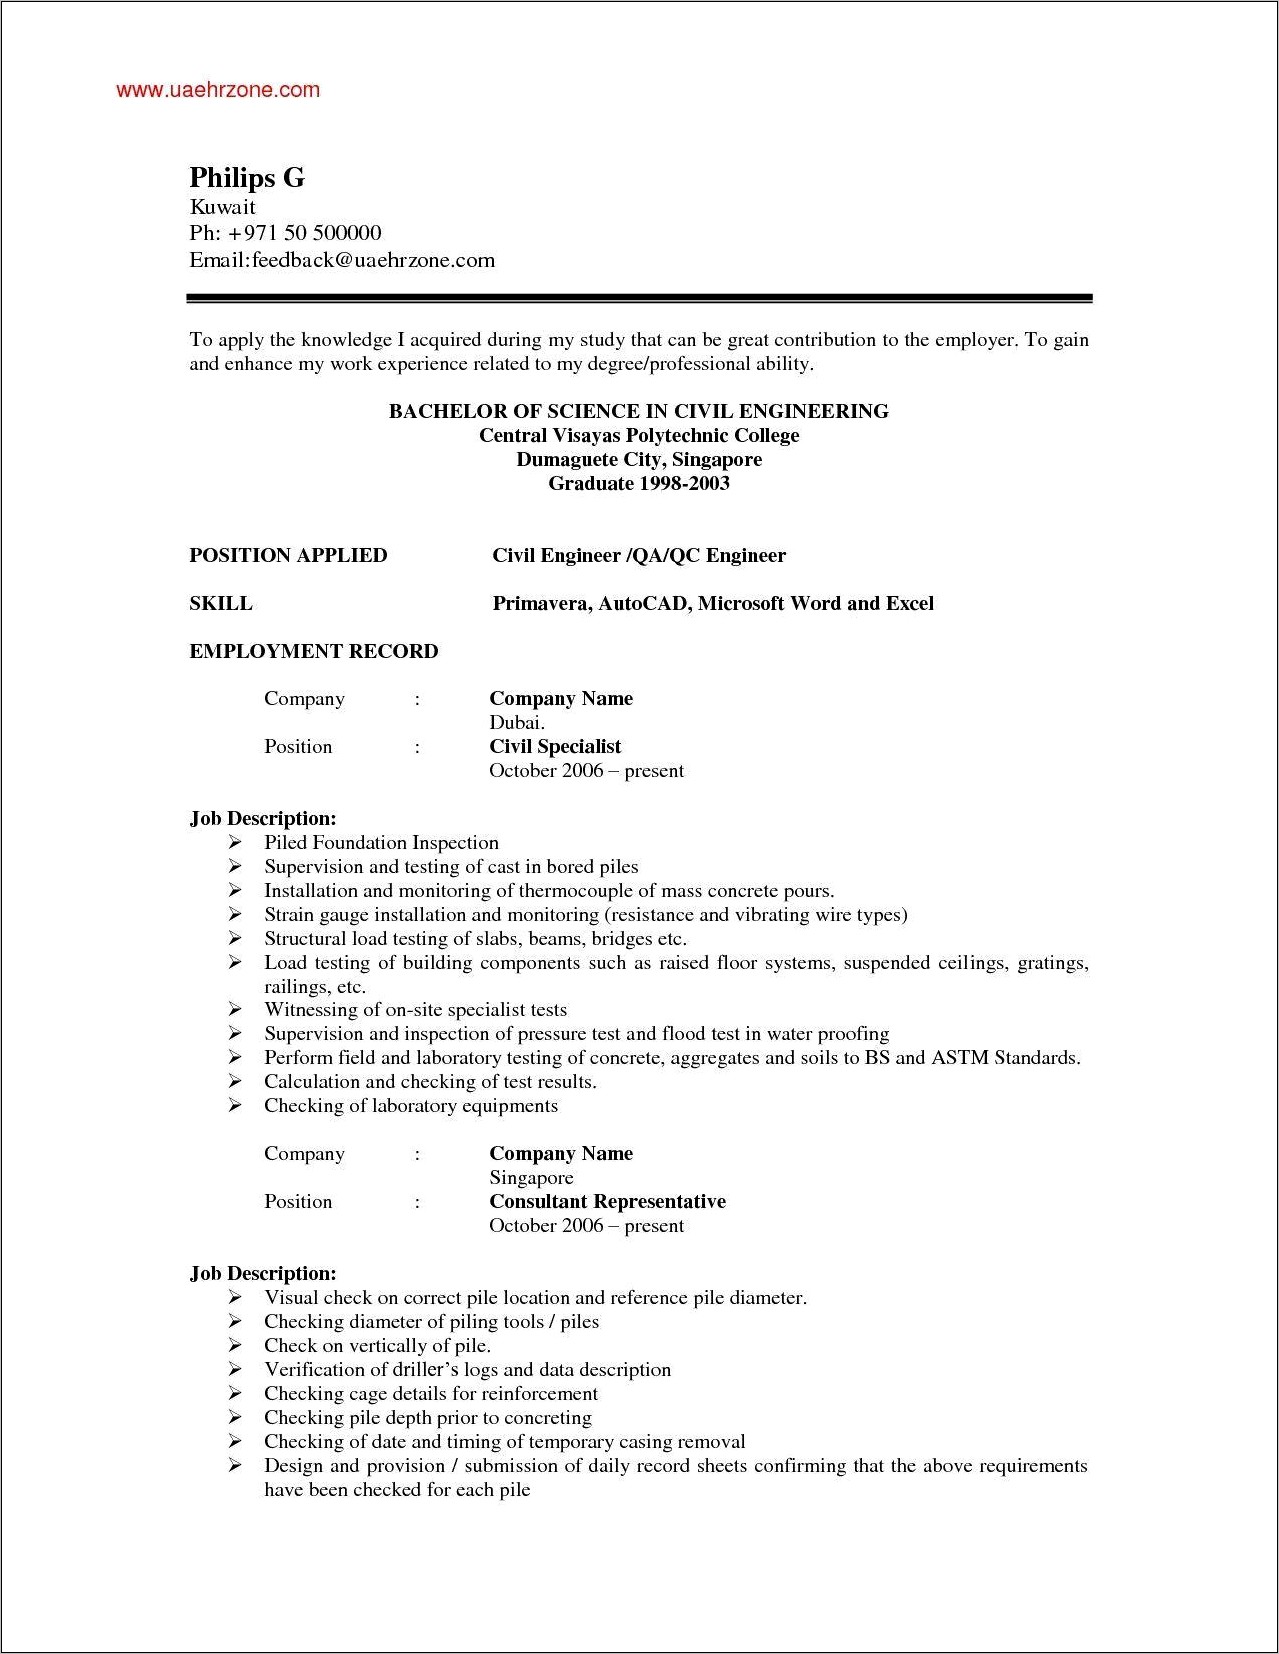 Resume Objective For College Job